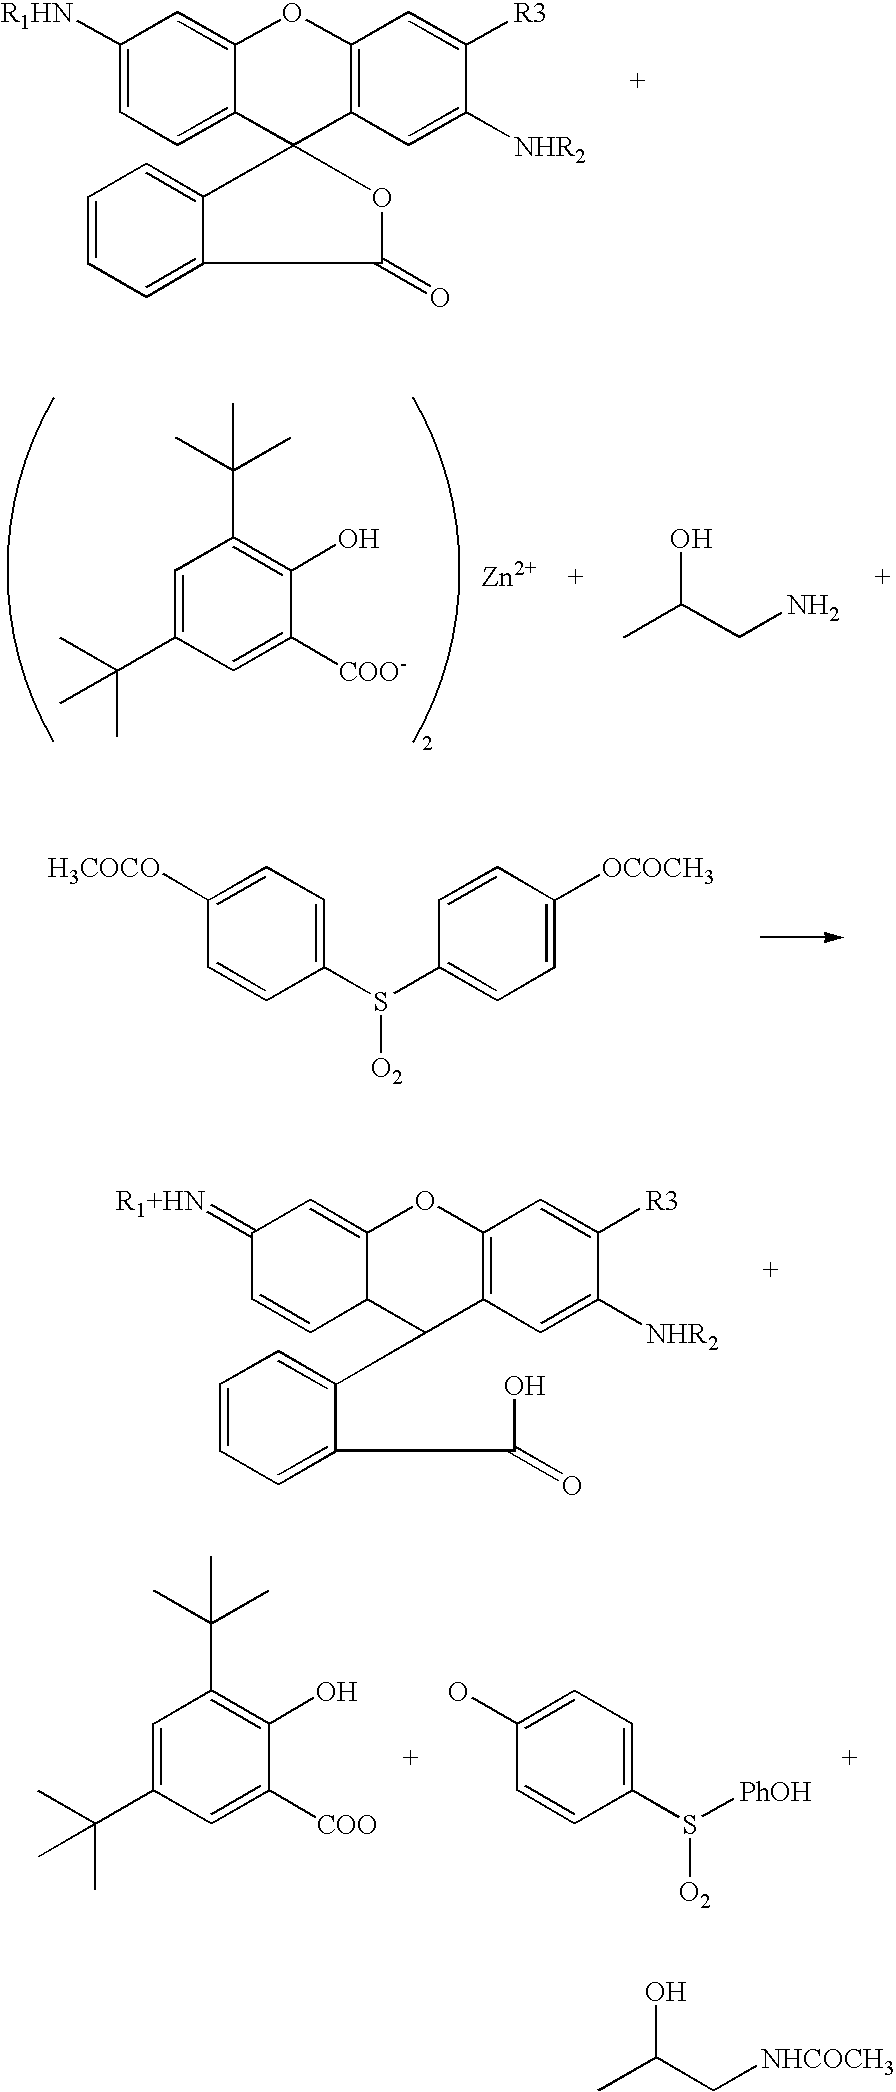 Metal salt activators for use in leuco dye compositions